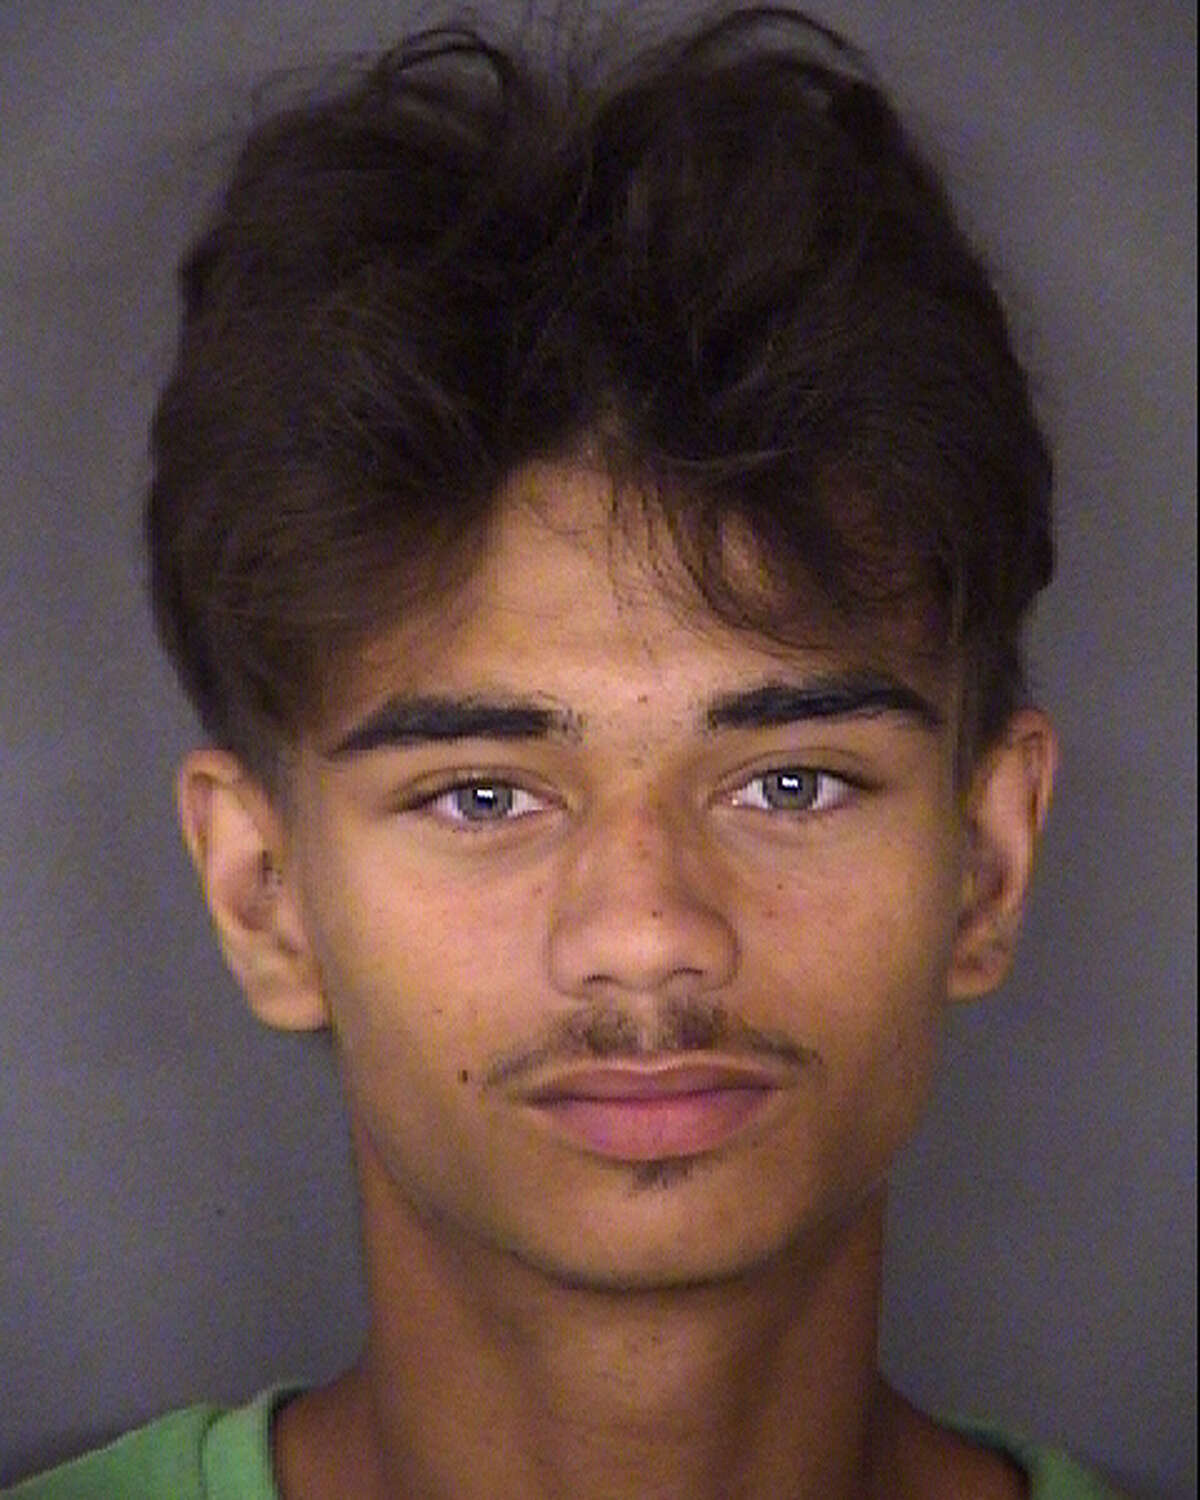 Isaiah Crayton was indicted for aggravated sexual assault of a child on Dec. 20, 2018.